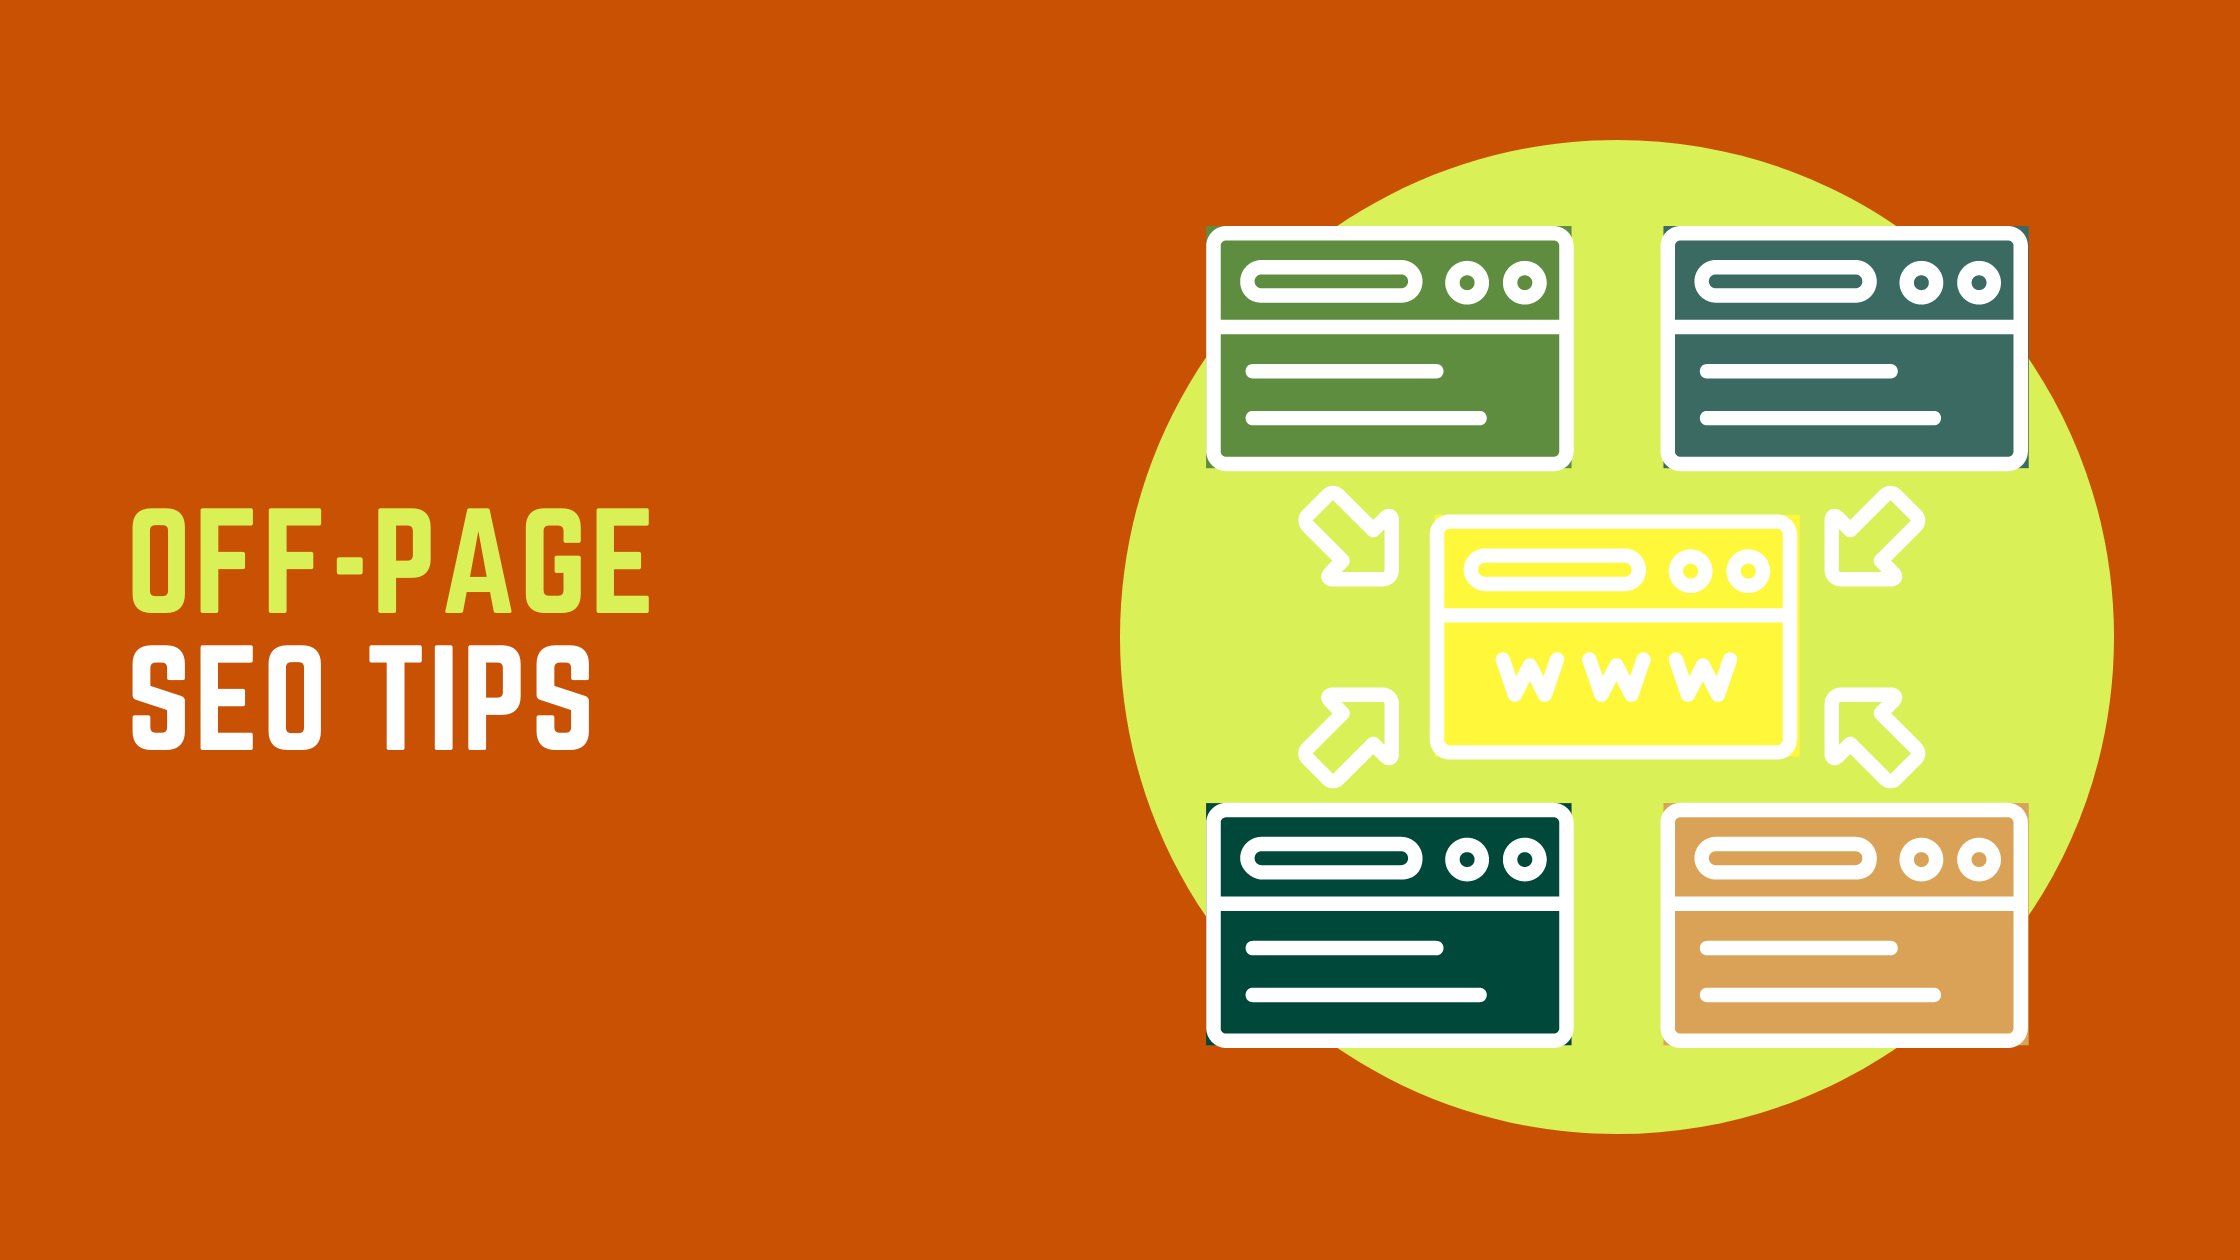 Tips for a better optimize off-page SEO on your Shopify store